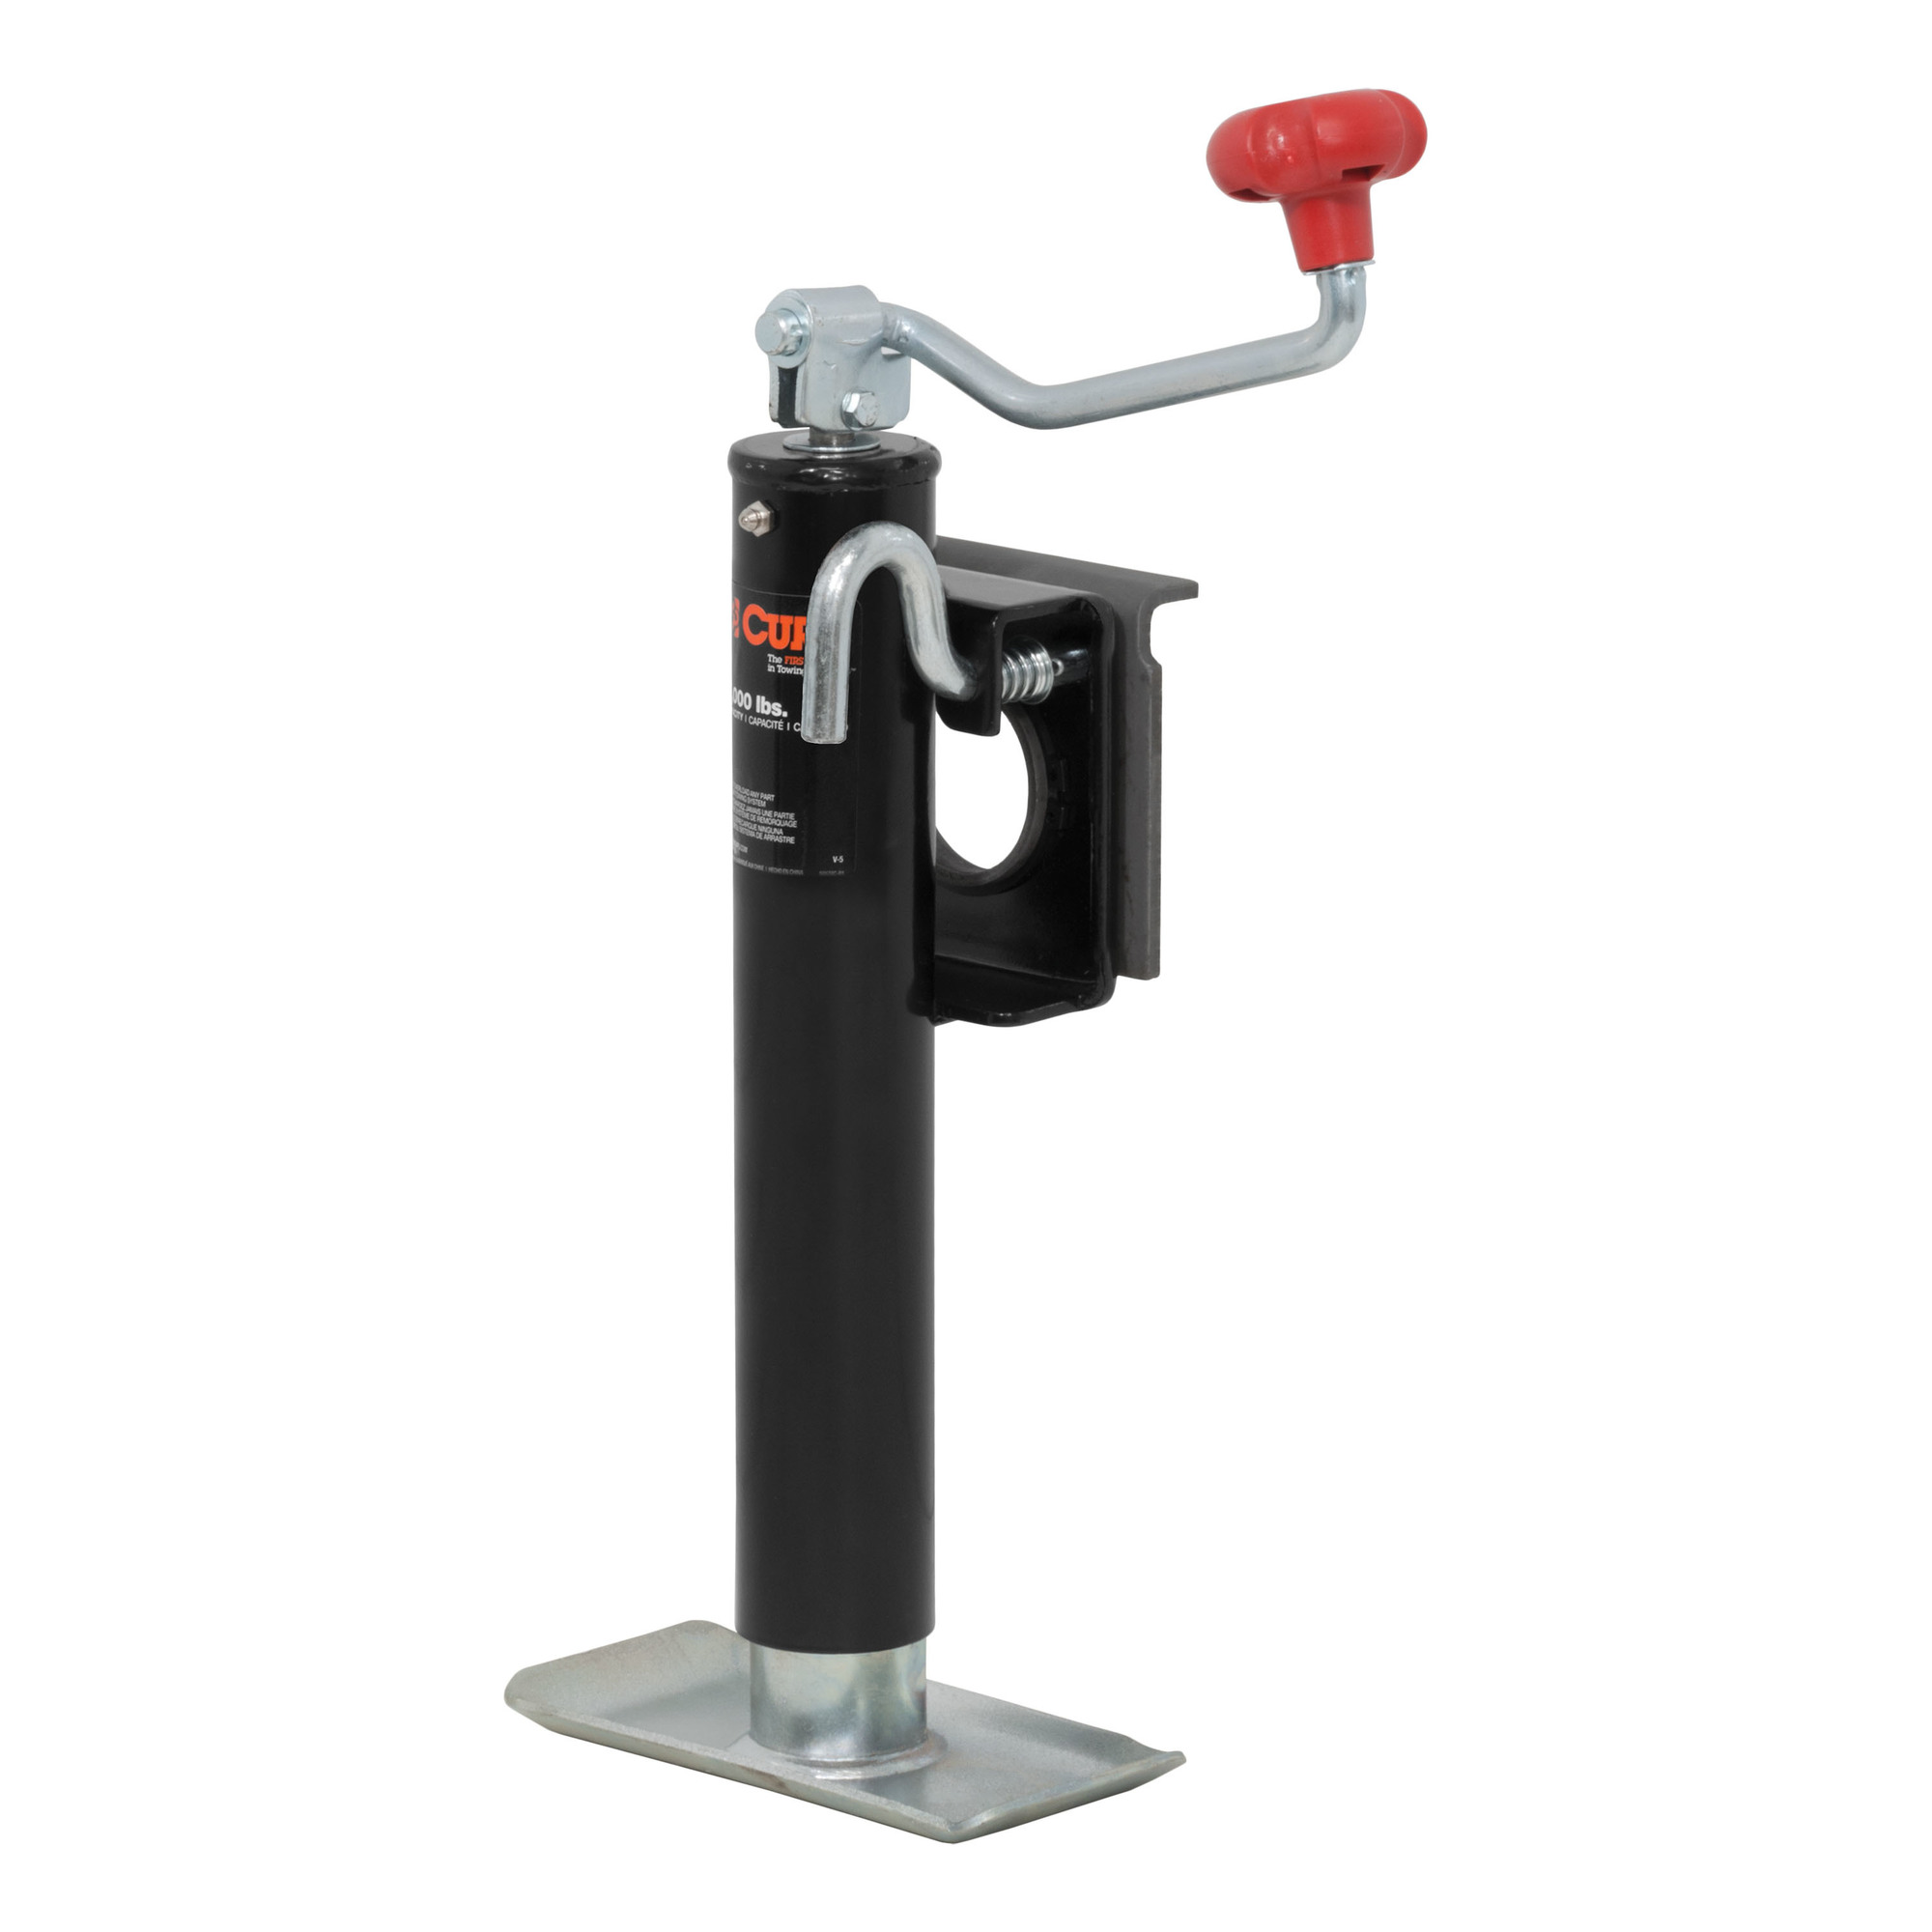 Curt Manufacturing, Bracket-Mnt Jack w Top Handle 2000 lbs 10Inch Travel, Lift Capacity 2000 lb, Jack Type Topwind, Mount Type Weld-On, Model 28301